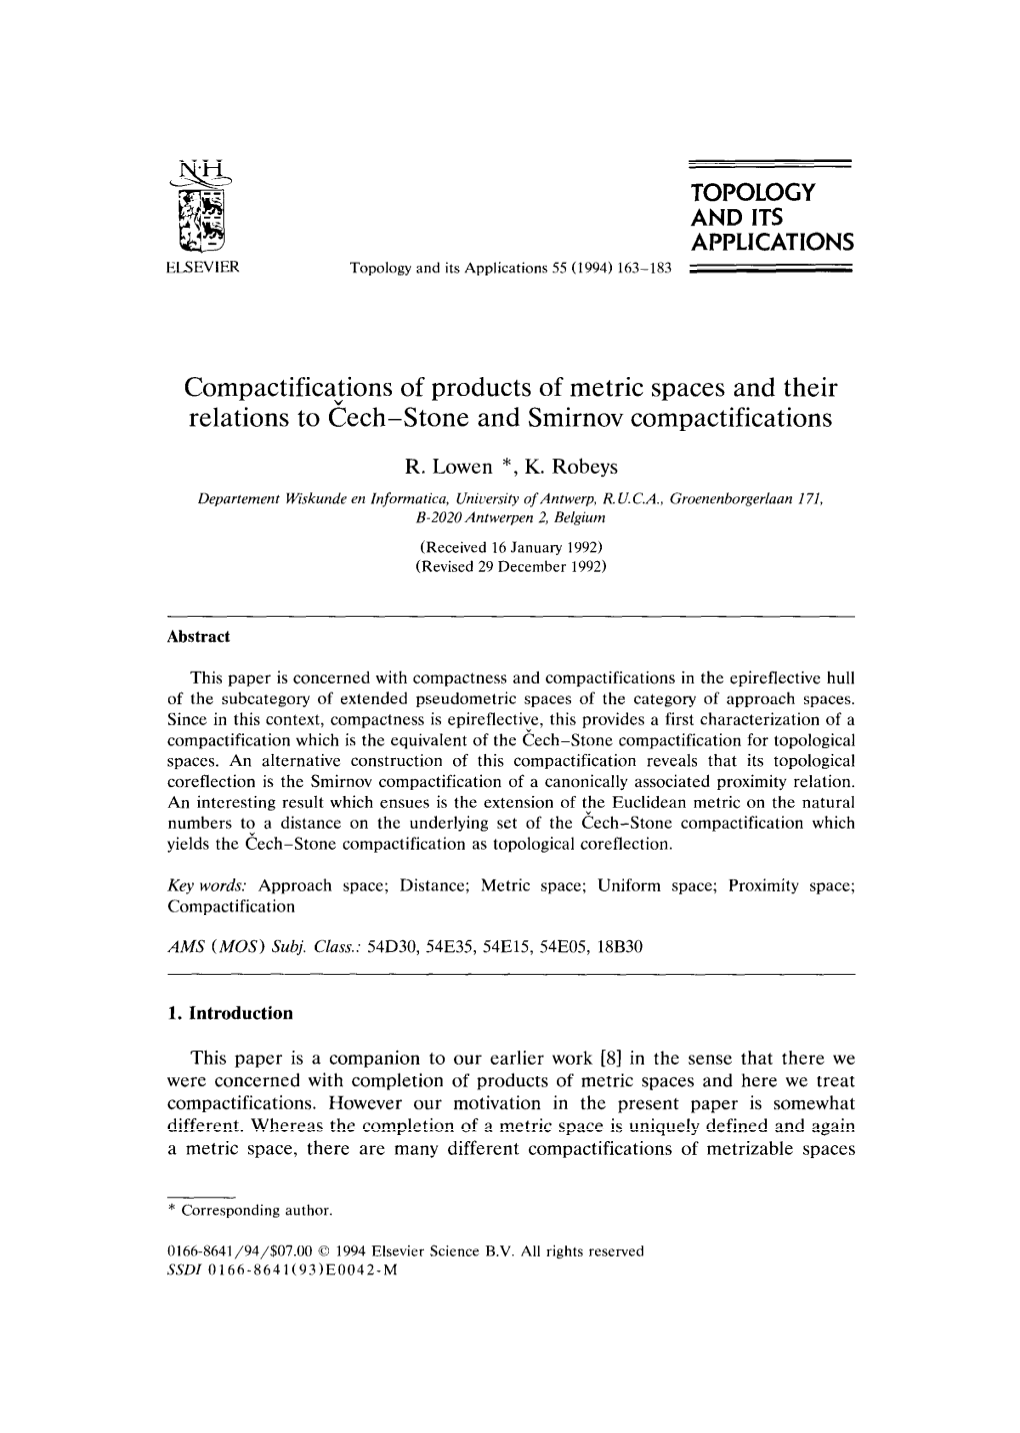 Compactificajions of Products of Metric Spaces and Their Relations to Cech-Stone and Smirnov Compactifications